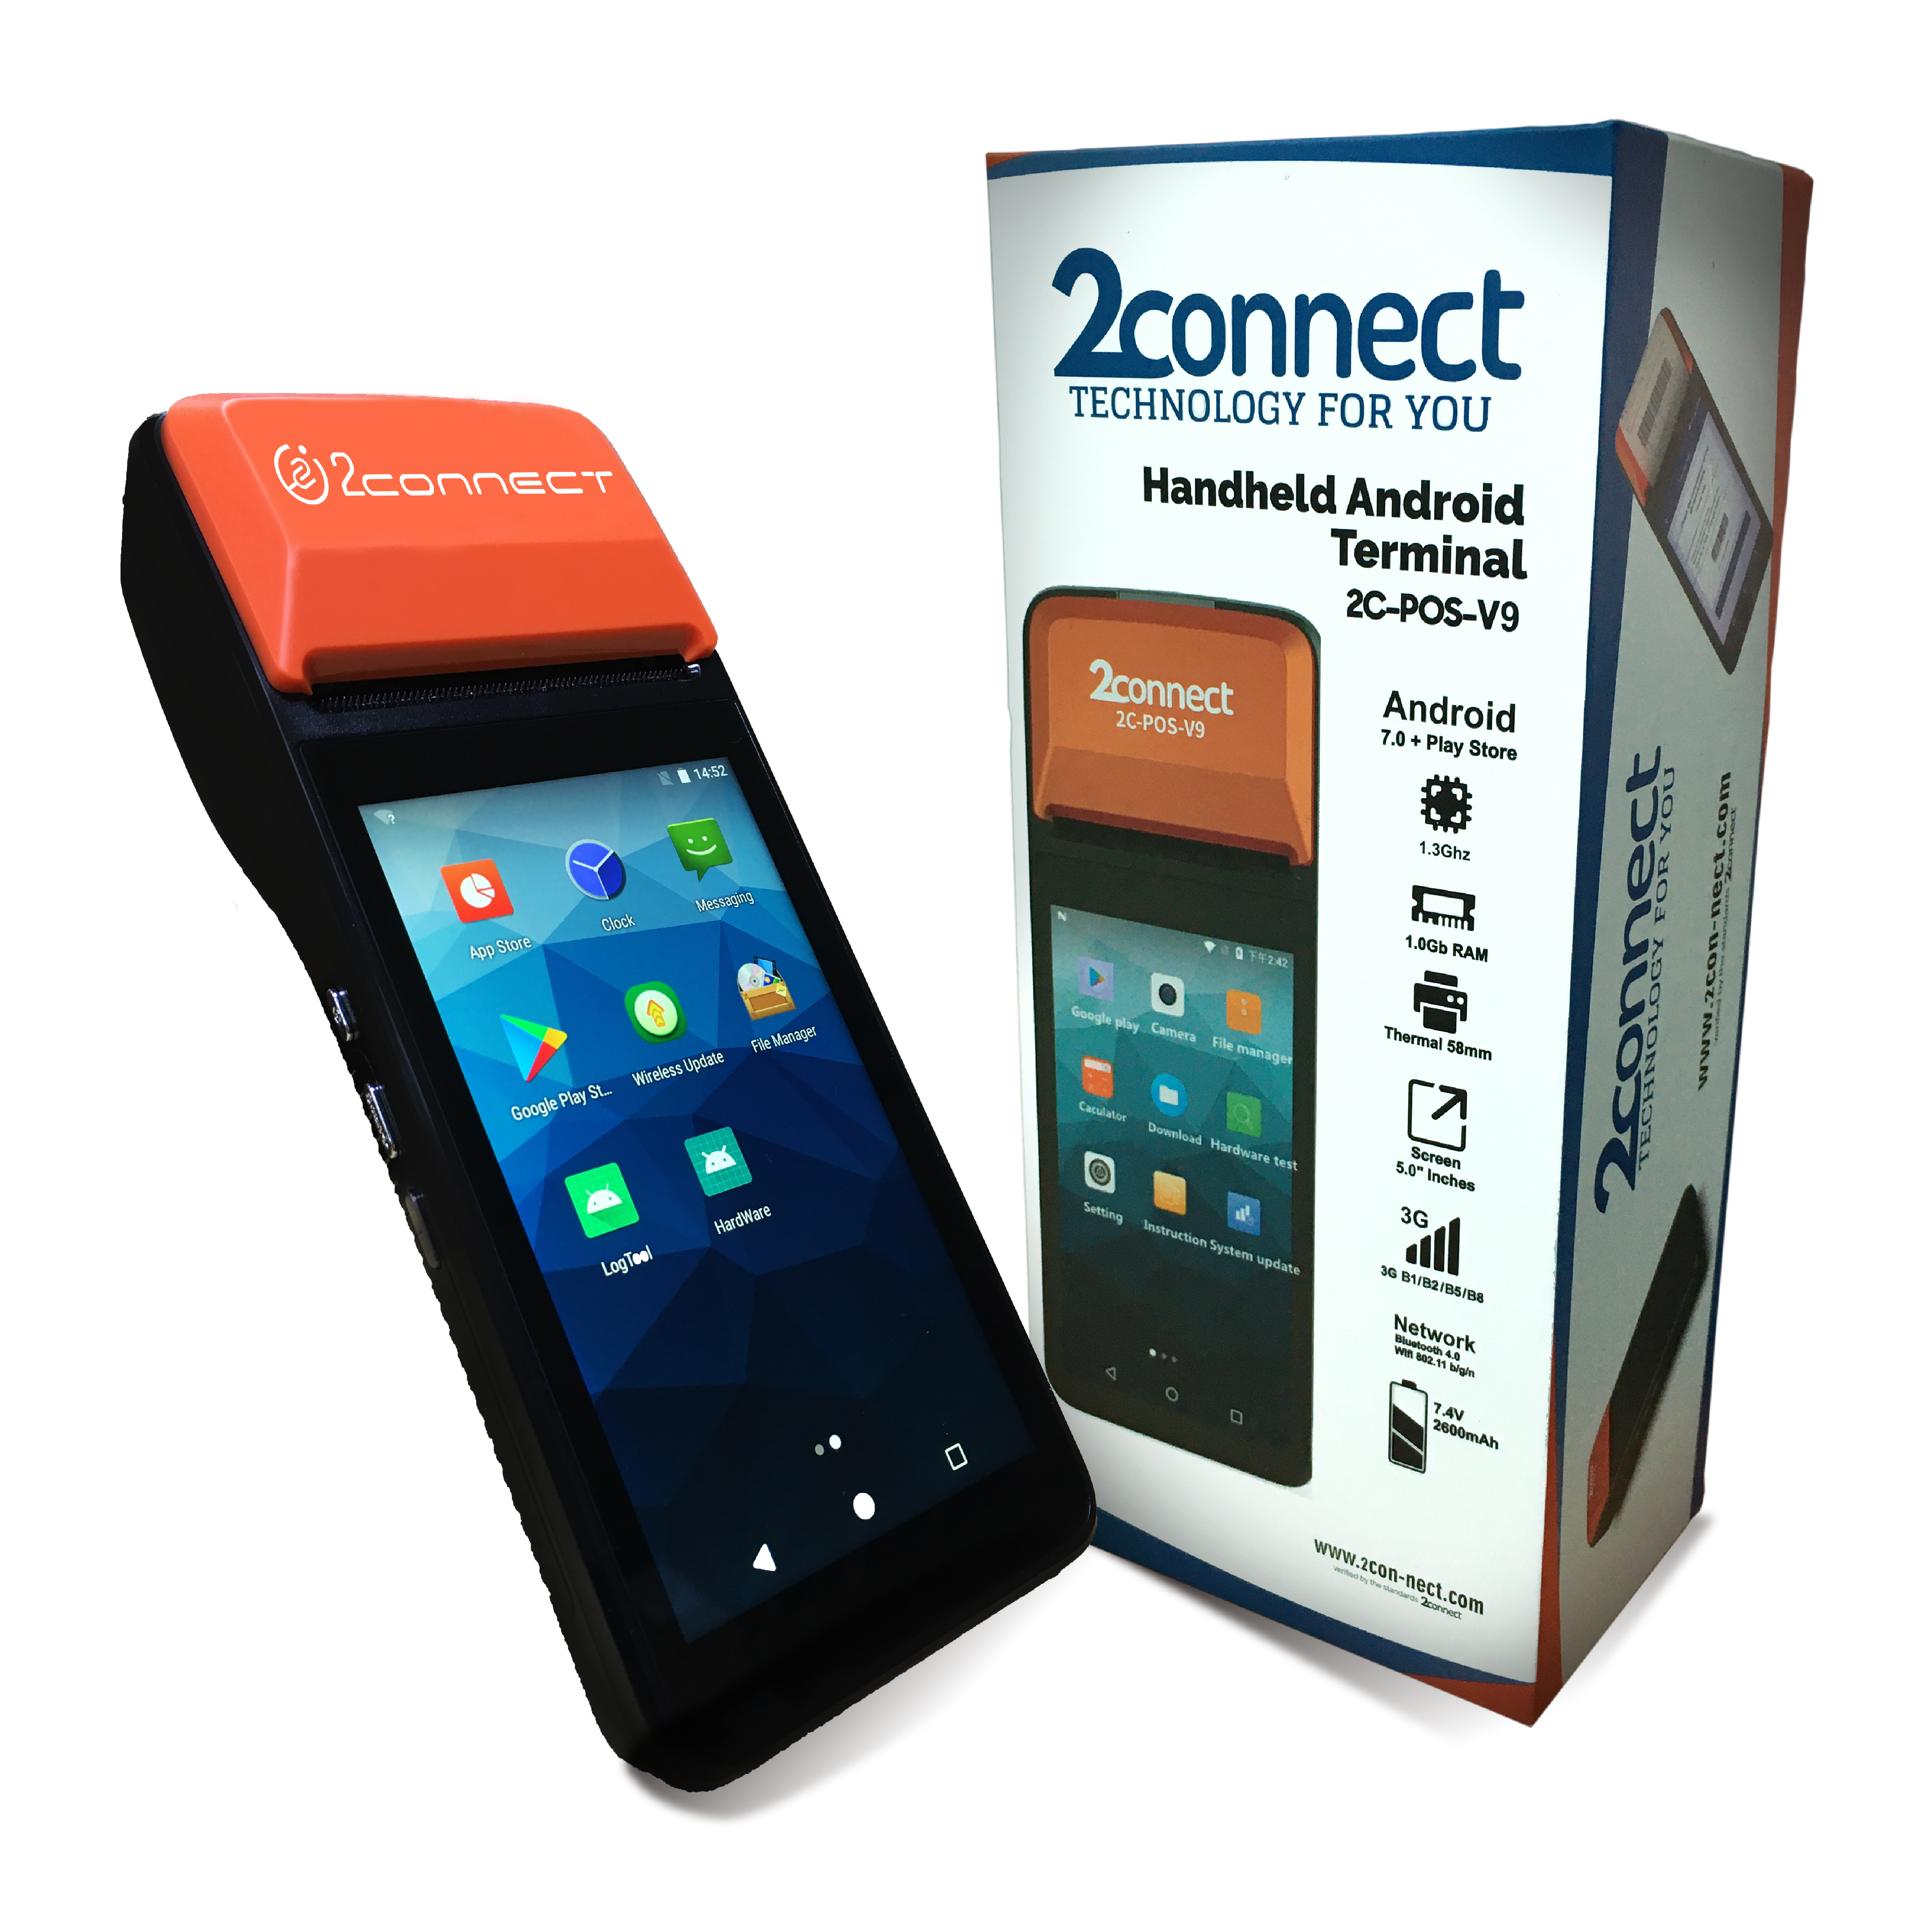 2connet Pos 2c-pos-v9 Mobile Android Veriphone